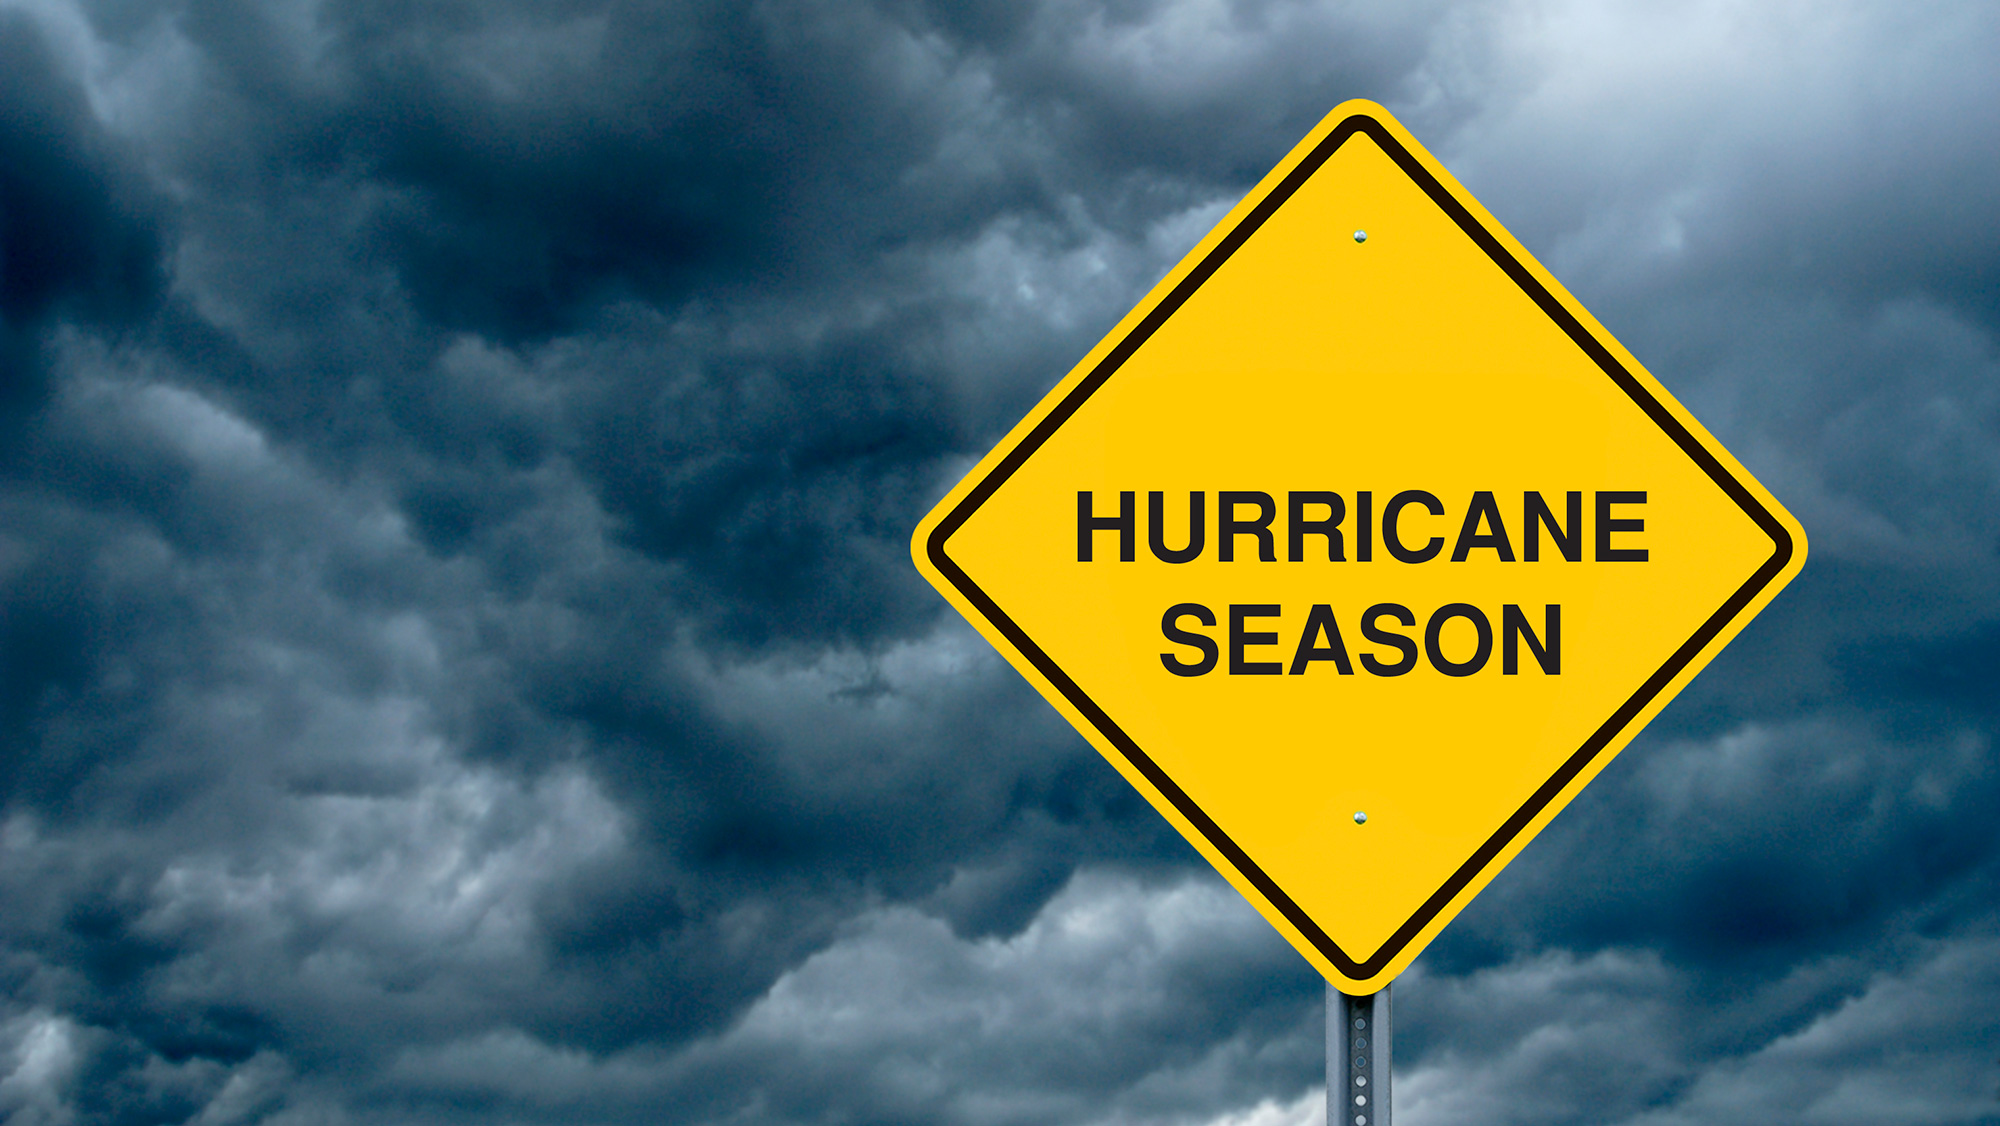 A yellow sign with black text that reads “Hurricane Season” in front of storm clouds.